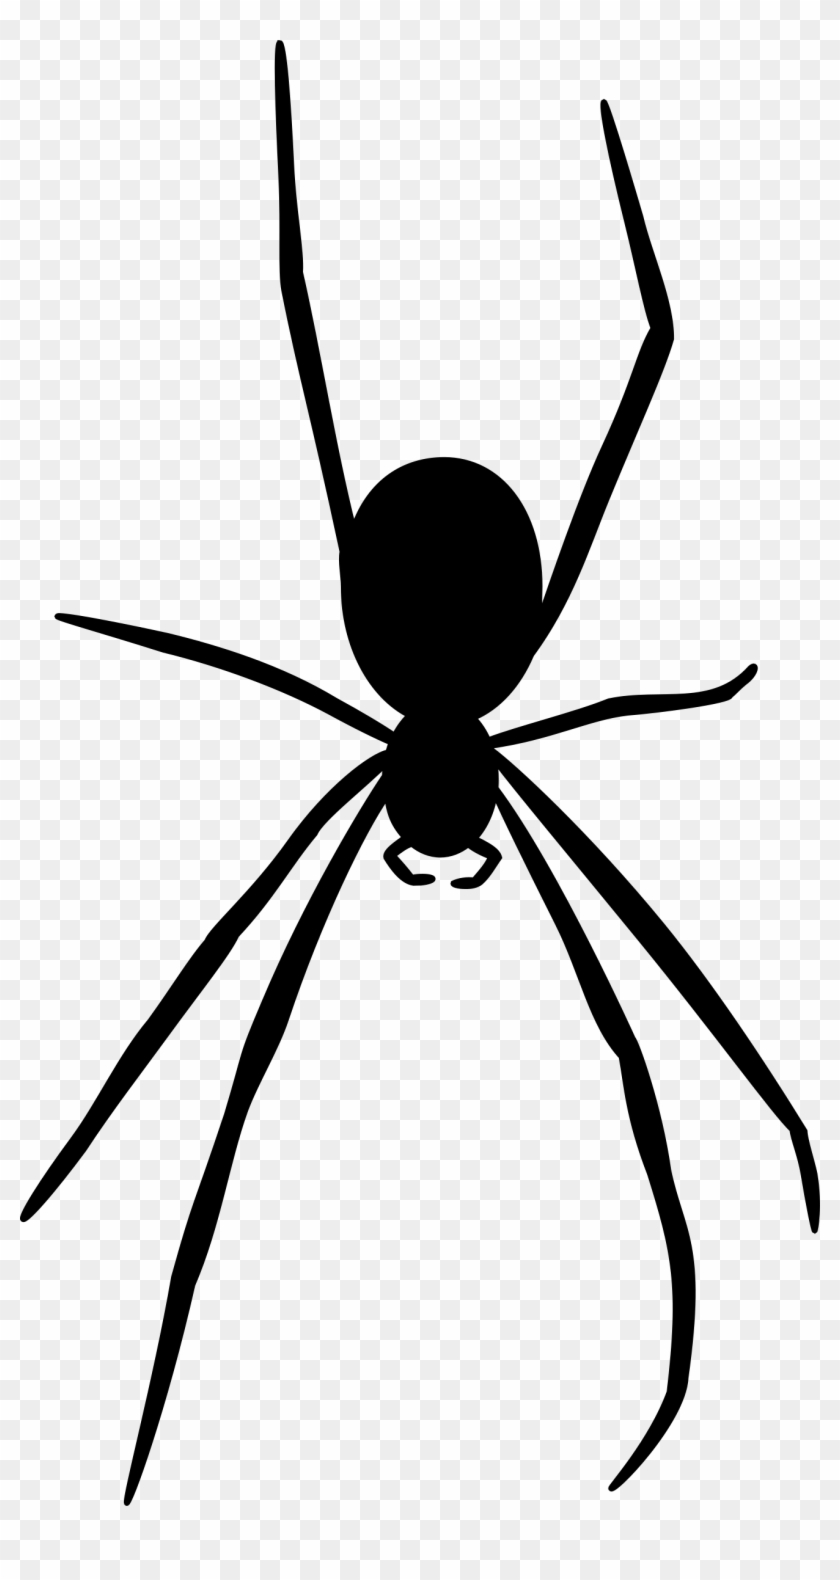 Black Spider Png Image Background - Spider Silhouette Png Clipart #573781